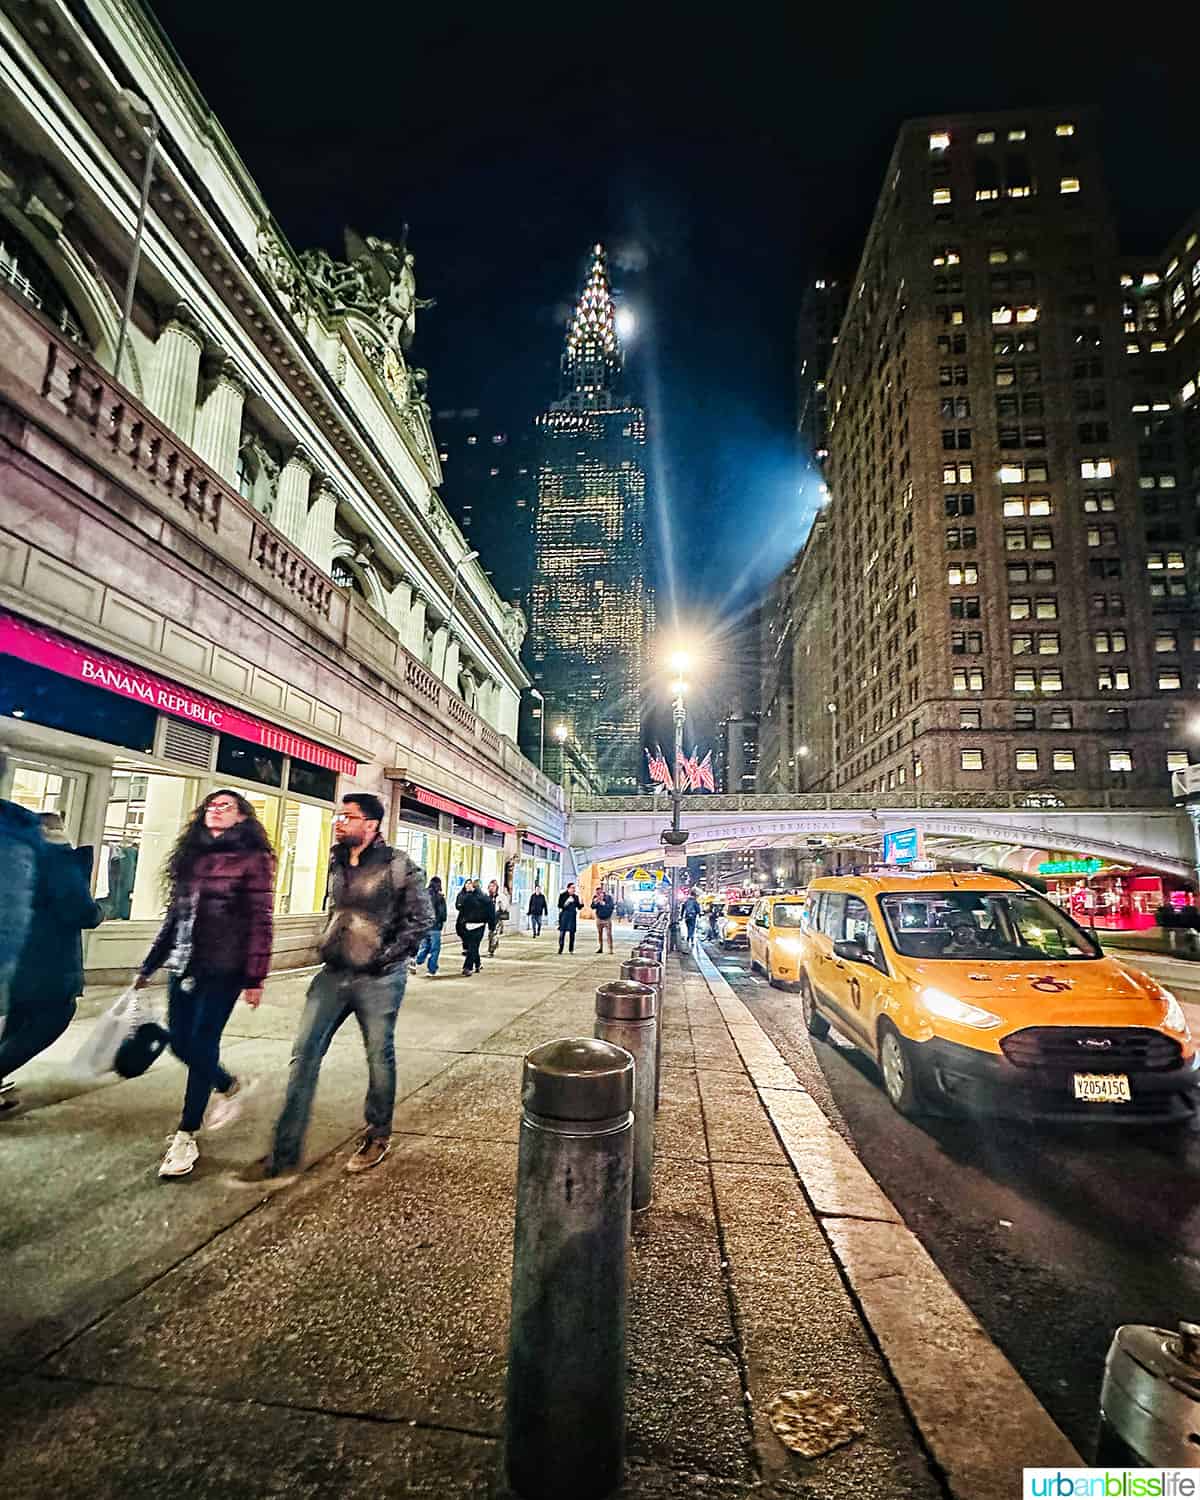 New York City street scene at night with yellow cabs and Chrysler building in the background.